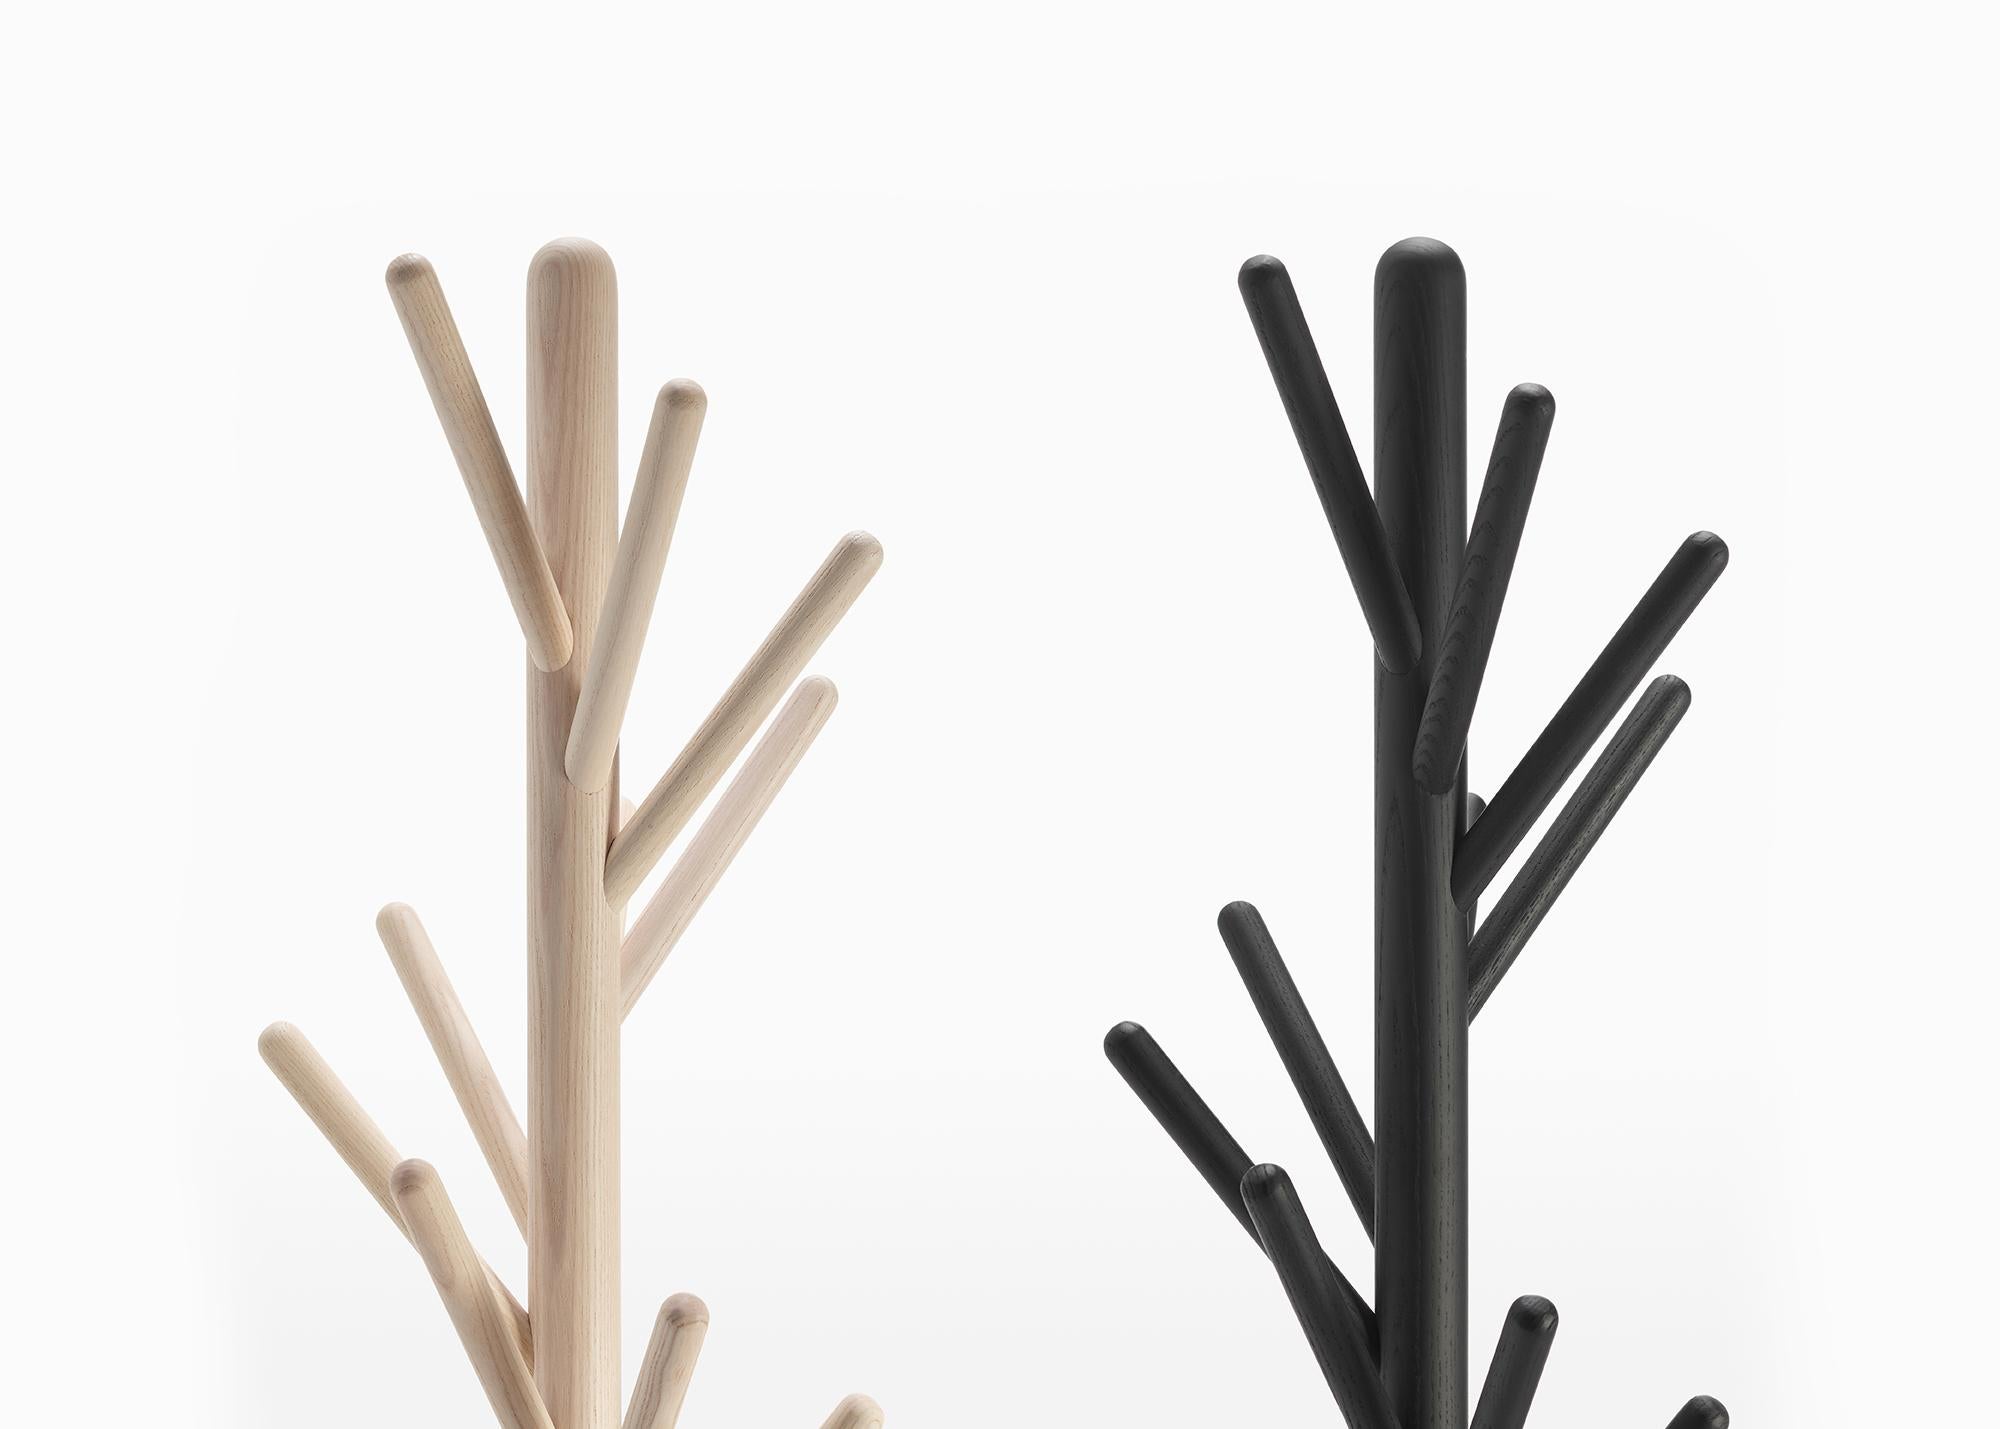 Coat stand in solid wood ash, stained in the colors black, natural bleached, red. Version 1 to be placed against the wall, version 2 freestanding with base in metal painted micaceous gray.

Born in Milan in 1920, Magistretti enrolled in the